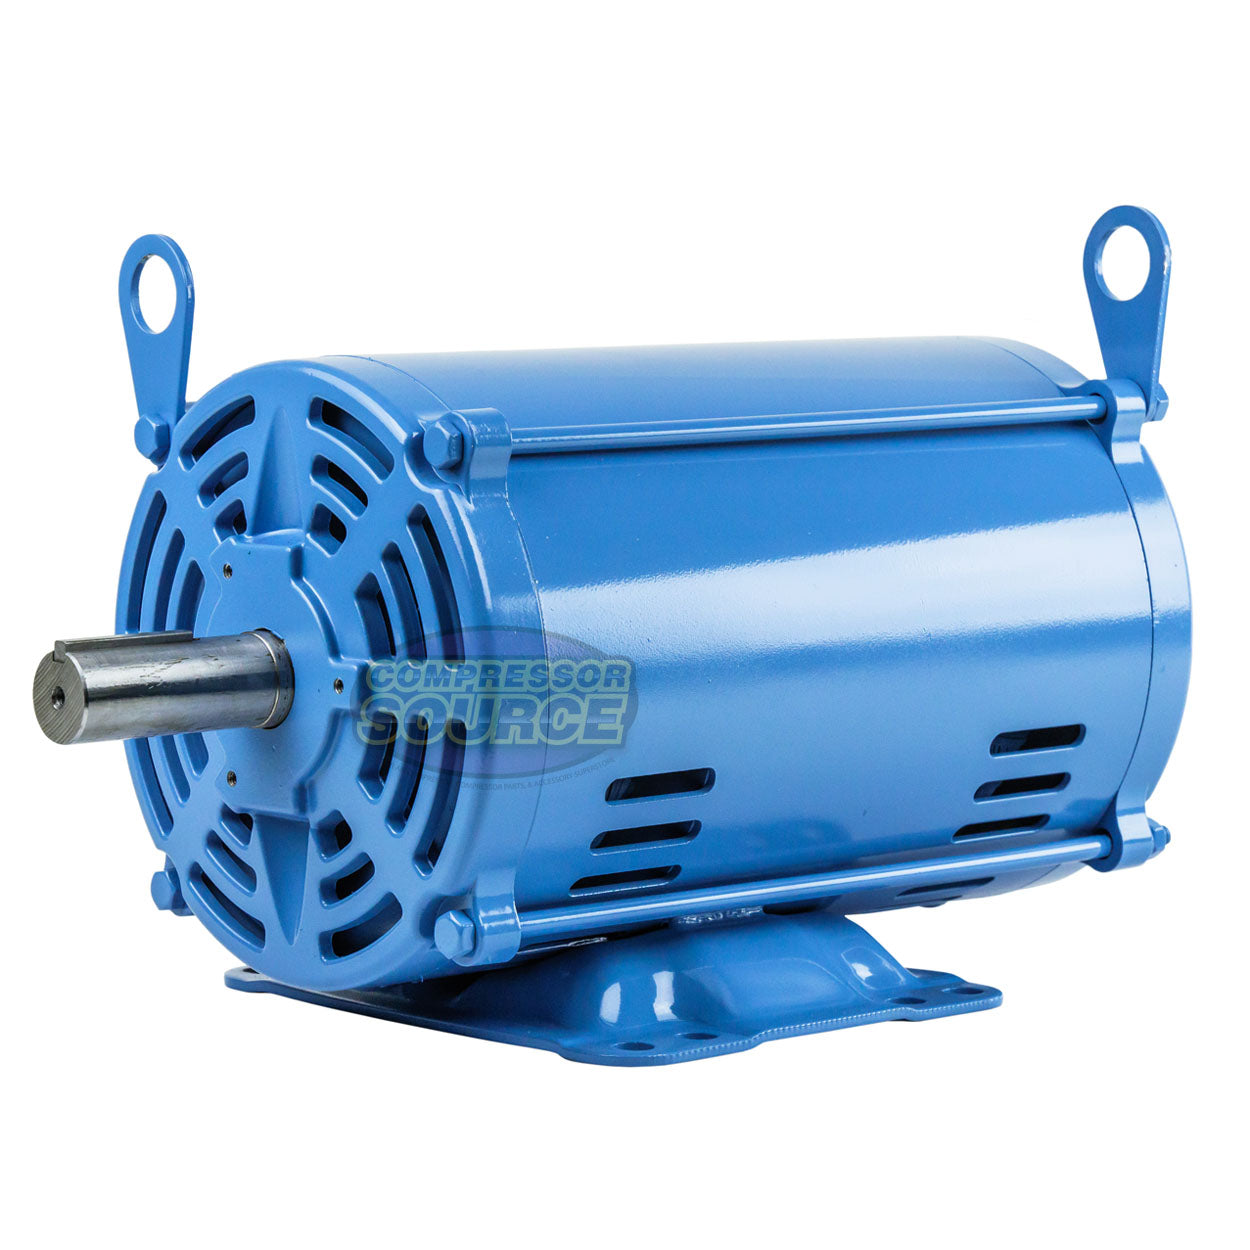 7.5 HP 3 Phase Electric Motor 3500 RPM 184T Frame ODP Open Drip Proof  230/460V